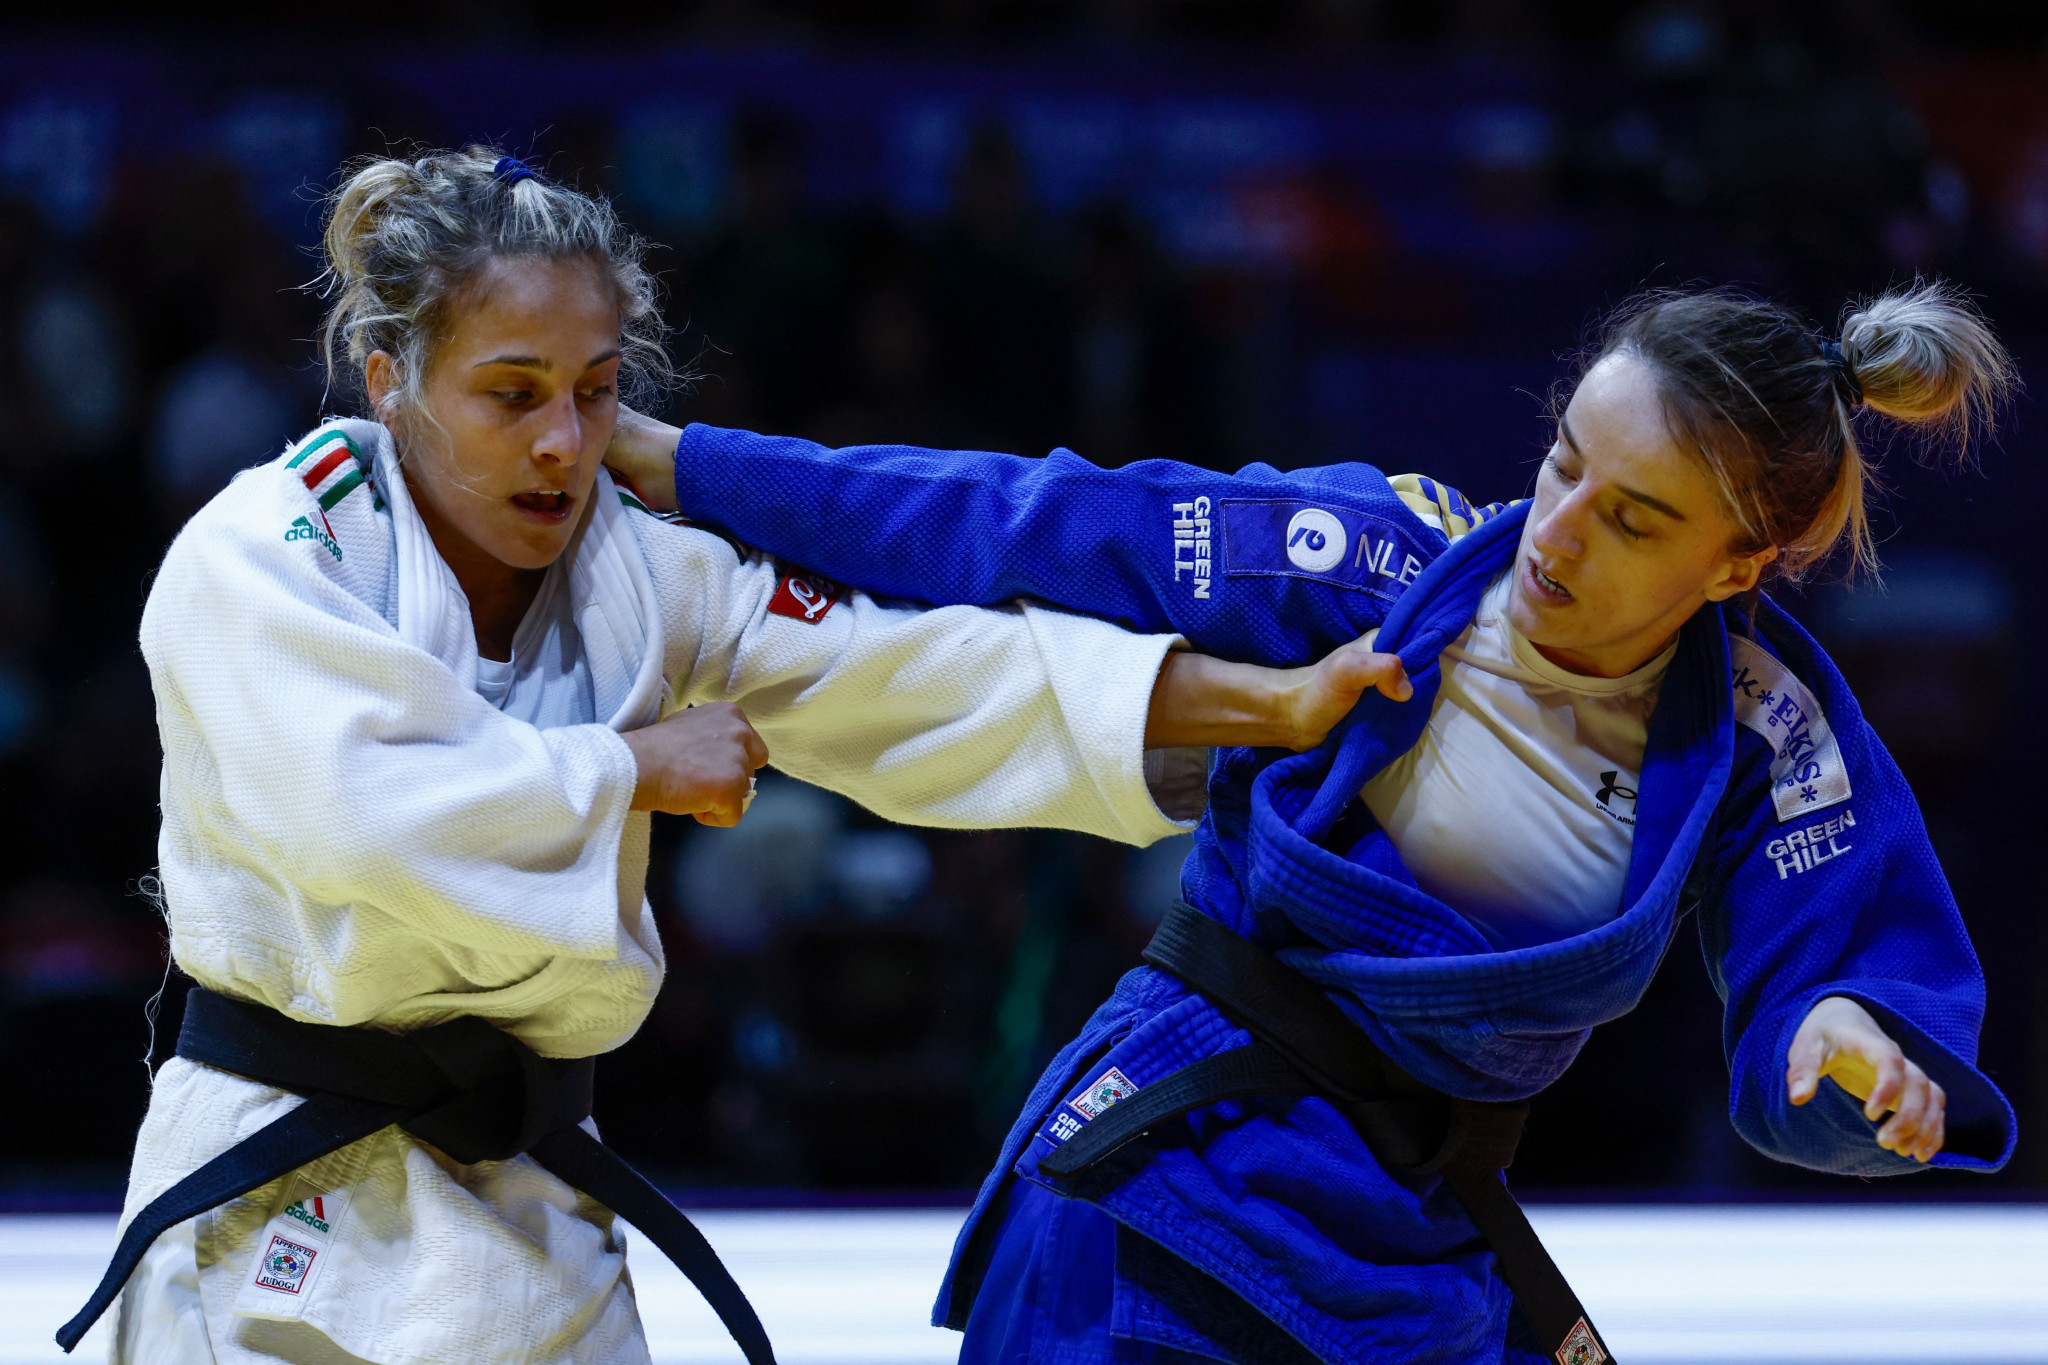 World Judo Championships: Day two of competition